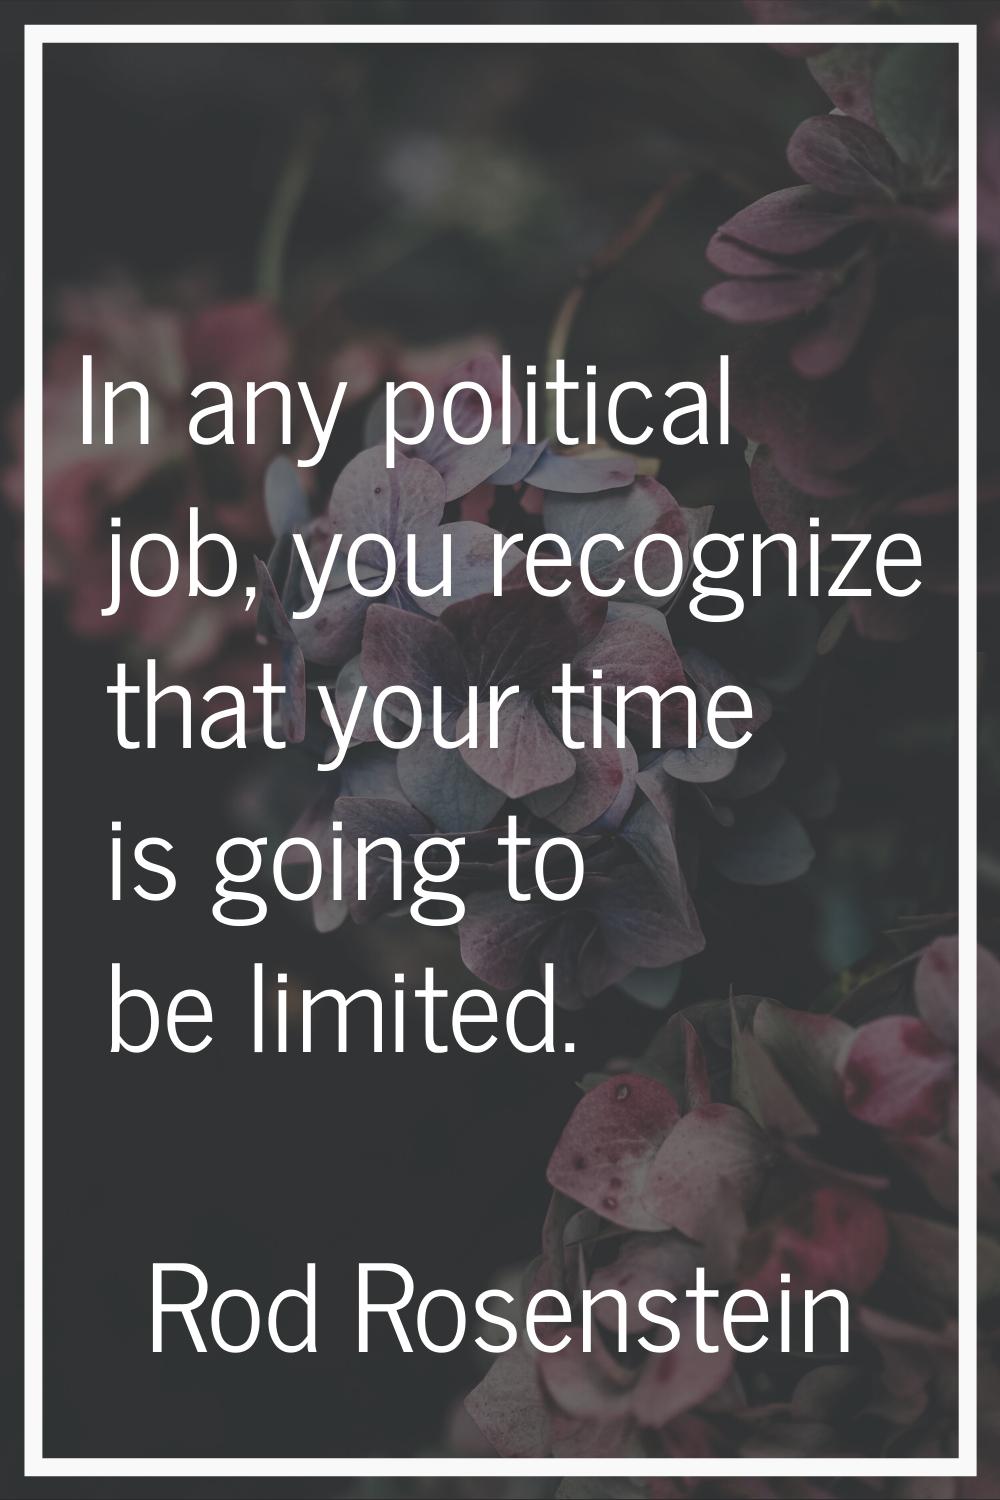 In any political job, you recognize that your time is going to be limited.